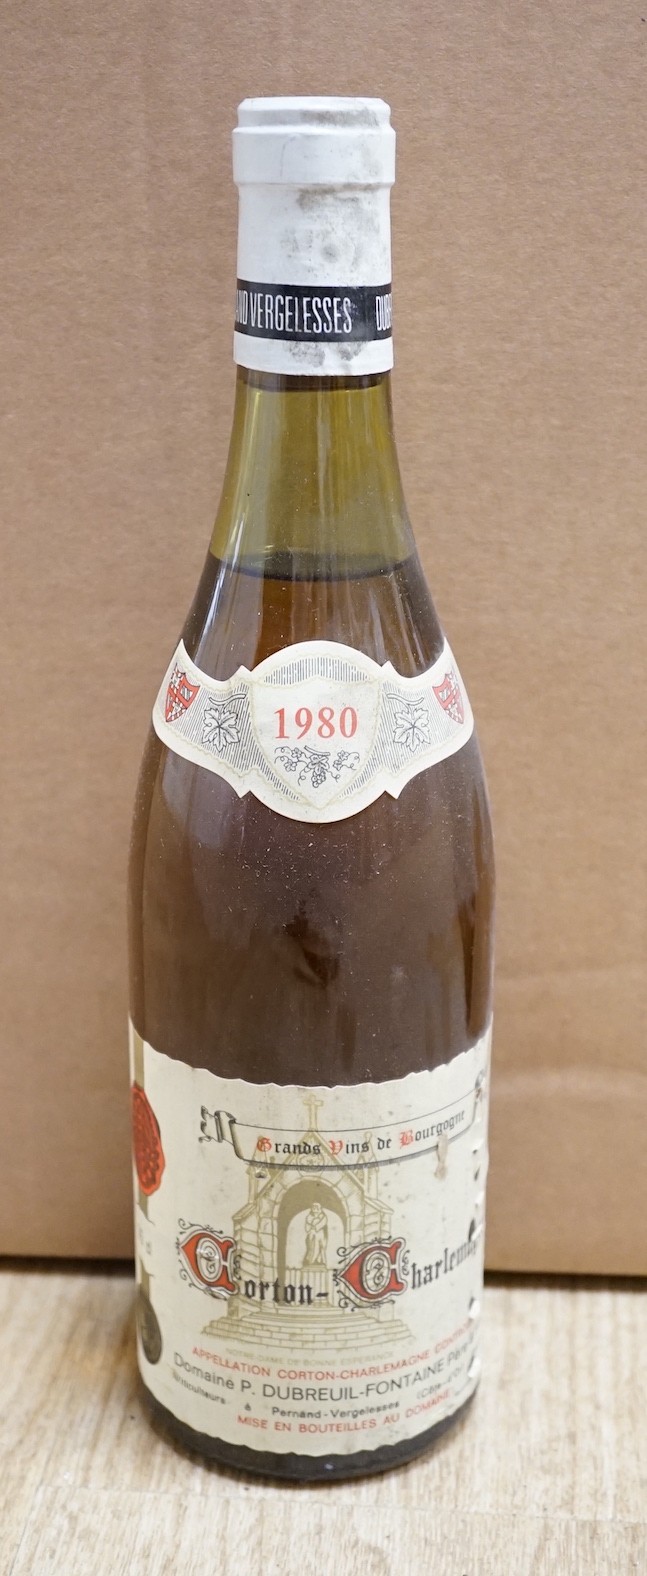 Ten bottles of assorted wine; to include four bottles of 1980 75cl Gorton-Chalemange, four bottles of 1982 75cl Chassange-Montrachet Les Baudines, and two bottles of 1979 75cl Bourgogne Rouge